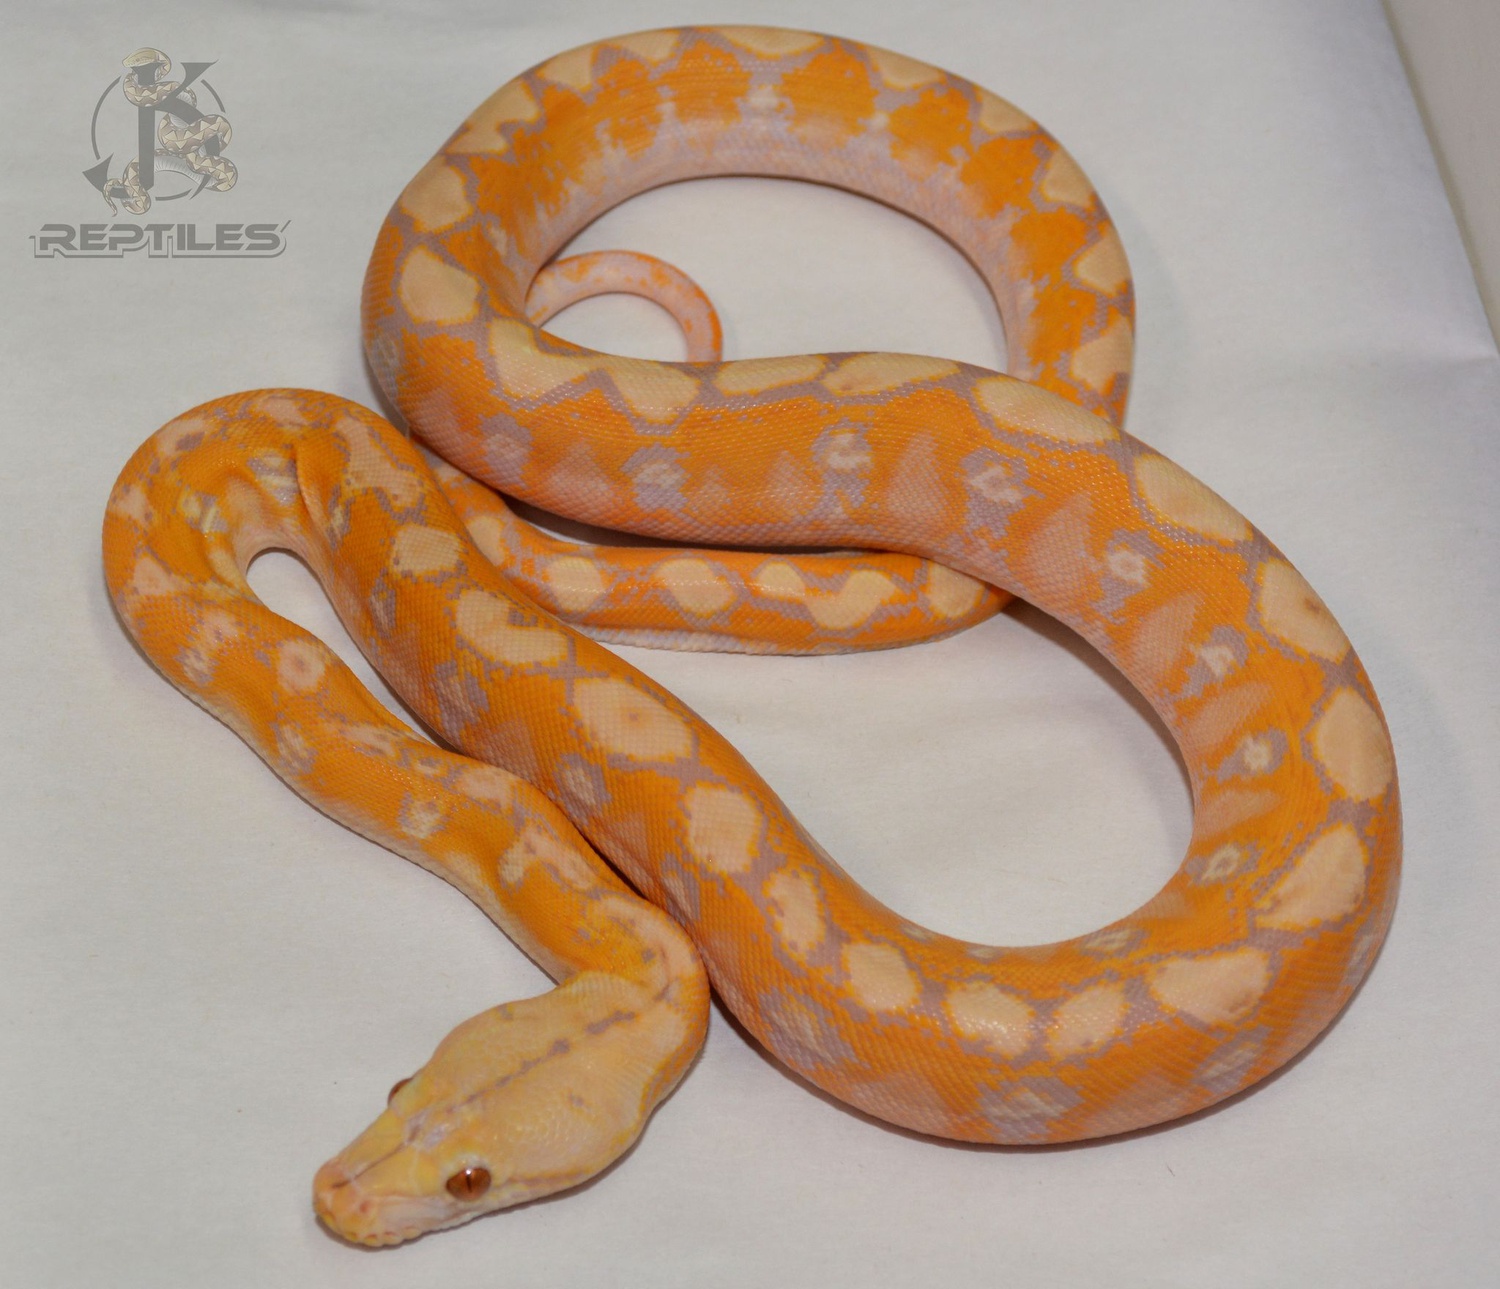 Blonde 66% Poss Het Anthrax Reticulated Python by JK Reptiles